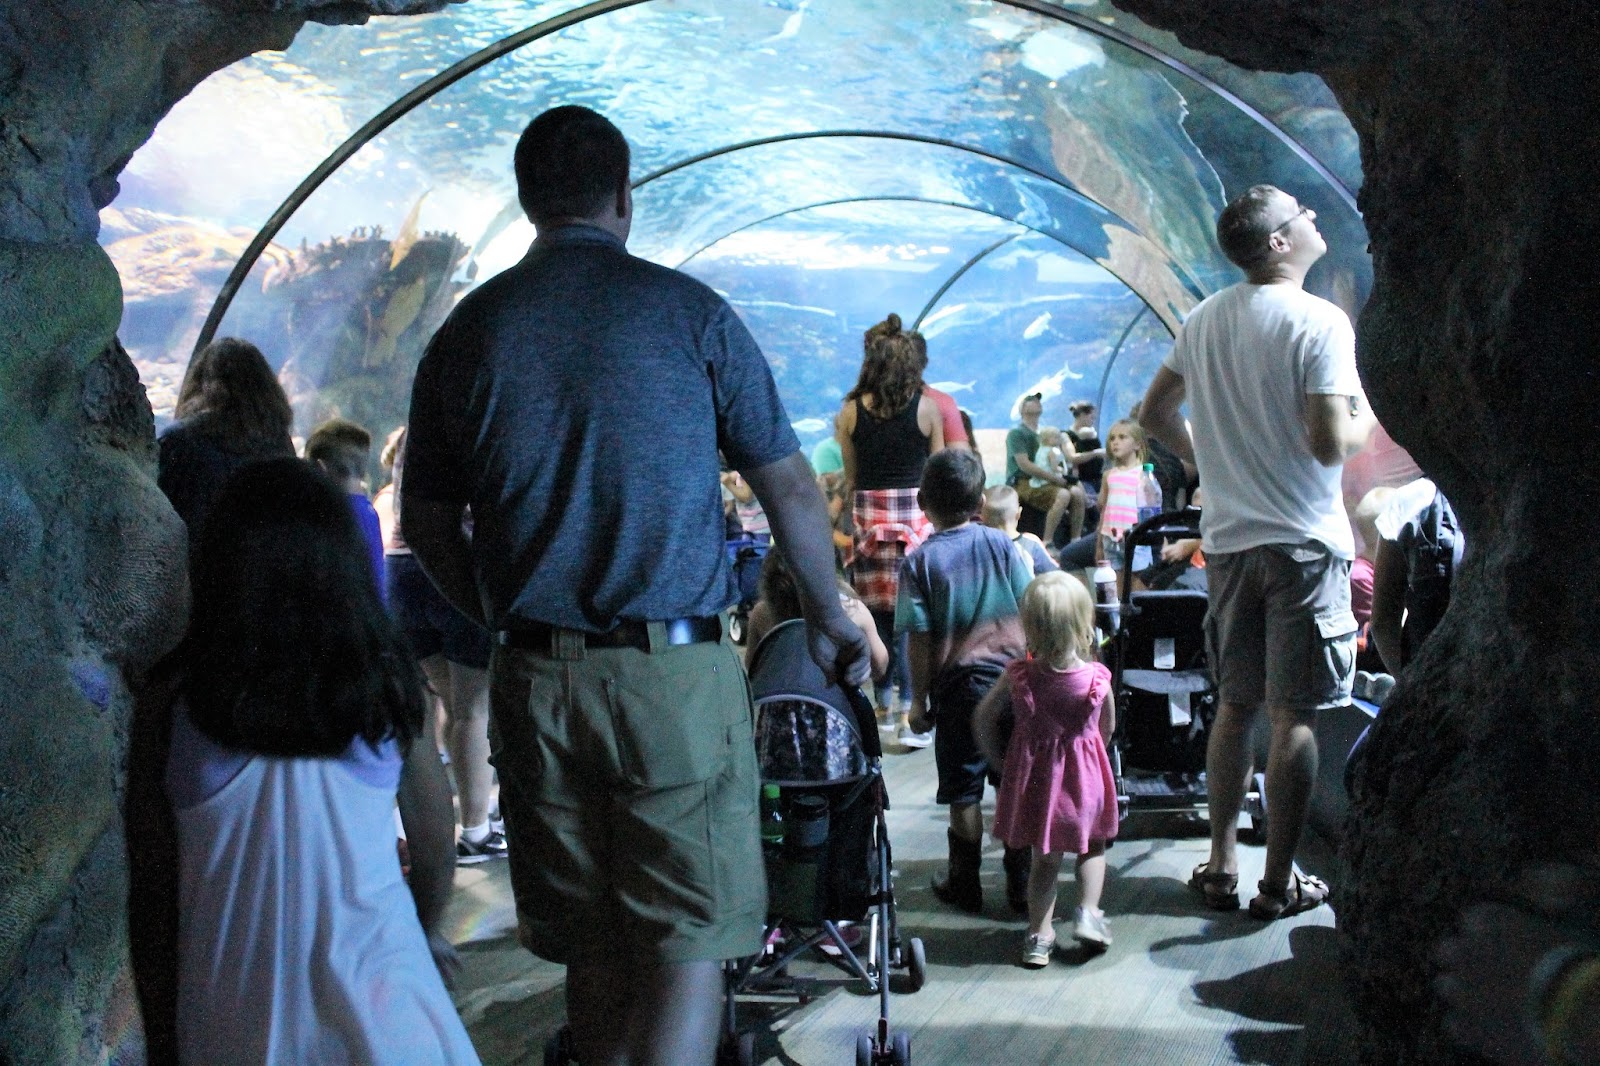 Corn, Beans, Pigs and Kids: Have a Wild Time at Omaha's Henry Doorly Zoo